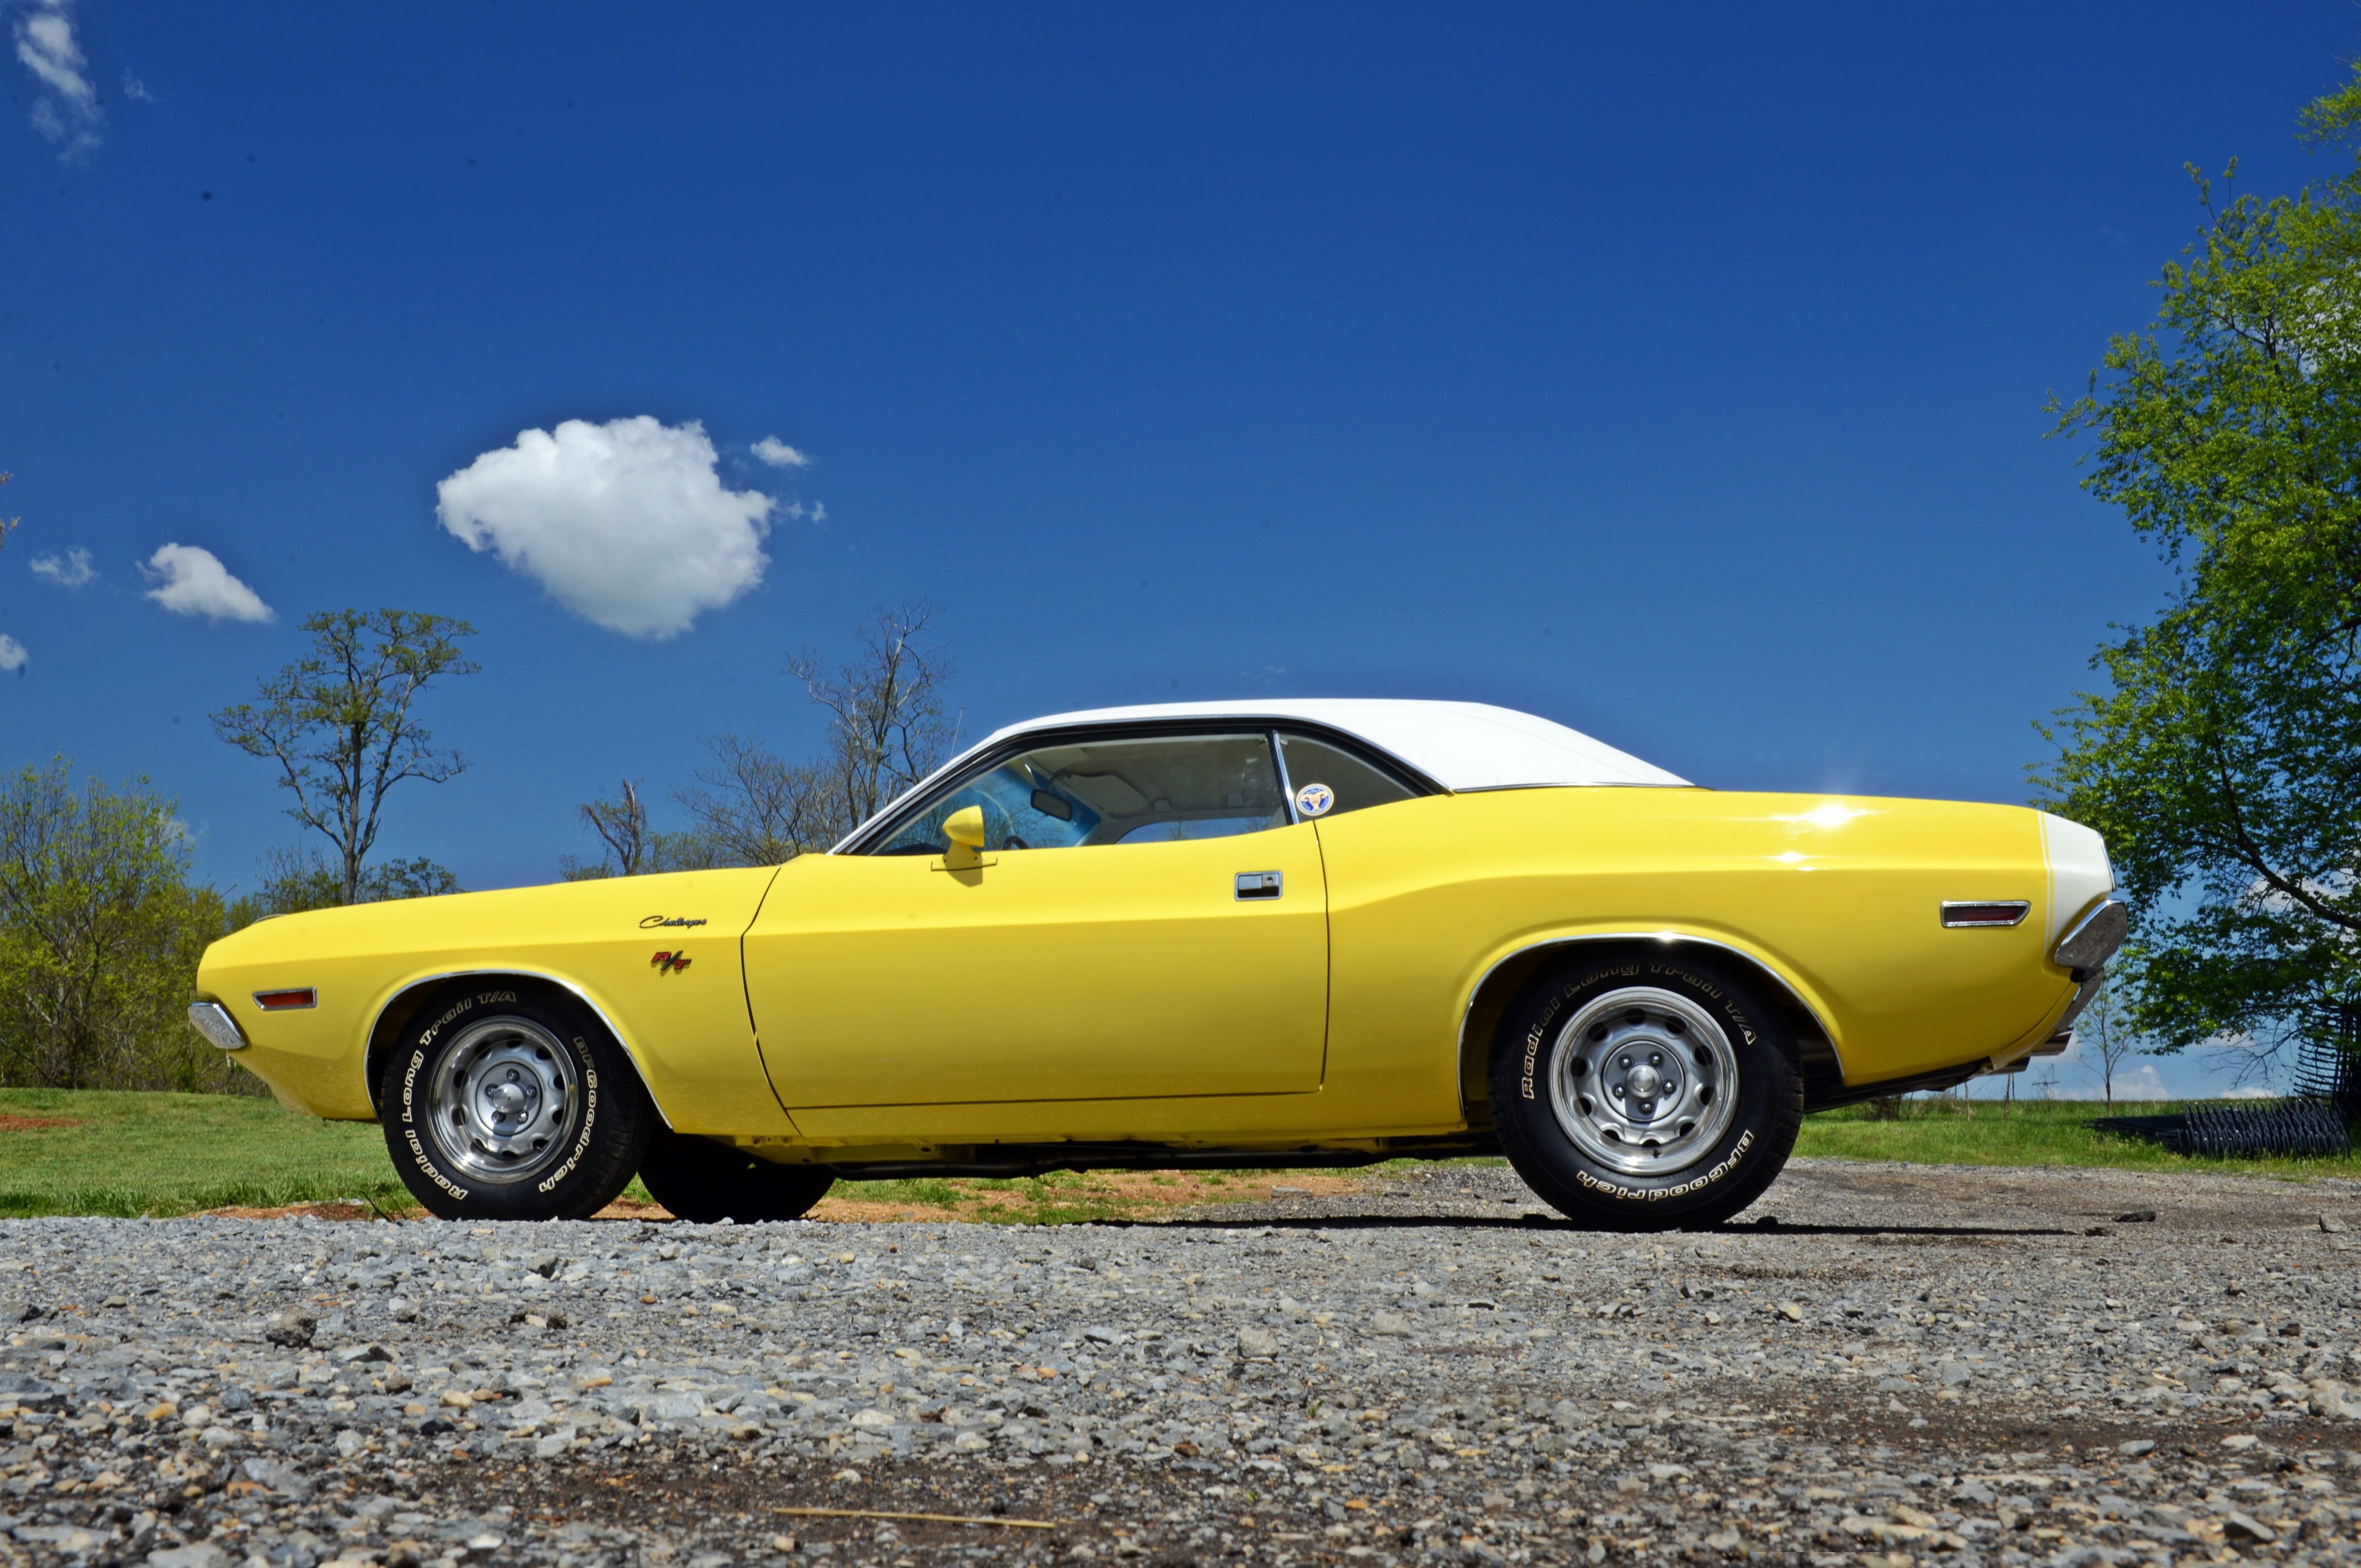 1970, Dodge, Challenger, Rt, Muscle, Classic, Old, Original, Yellow, Usa, 5435x3610 03 Wallpaper